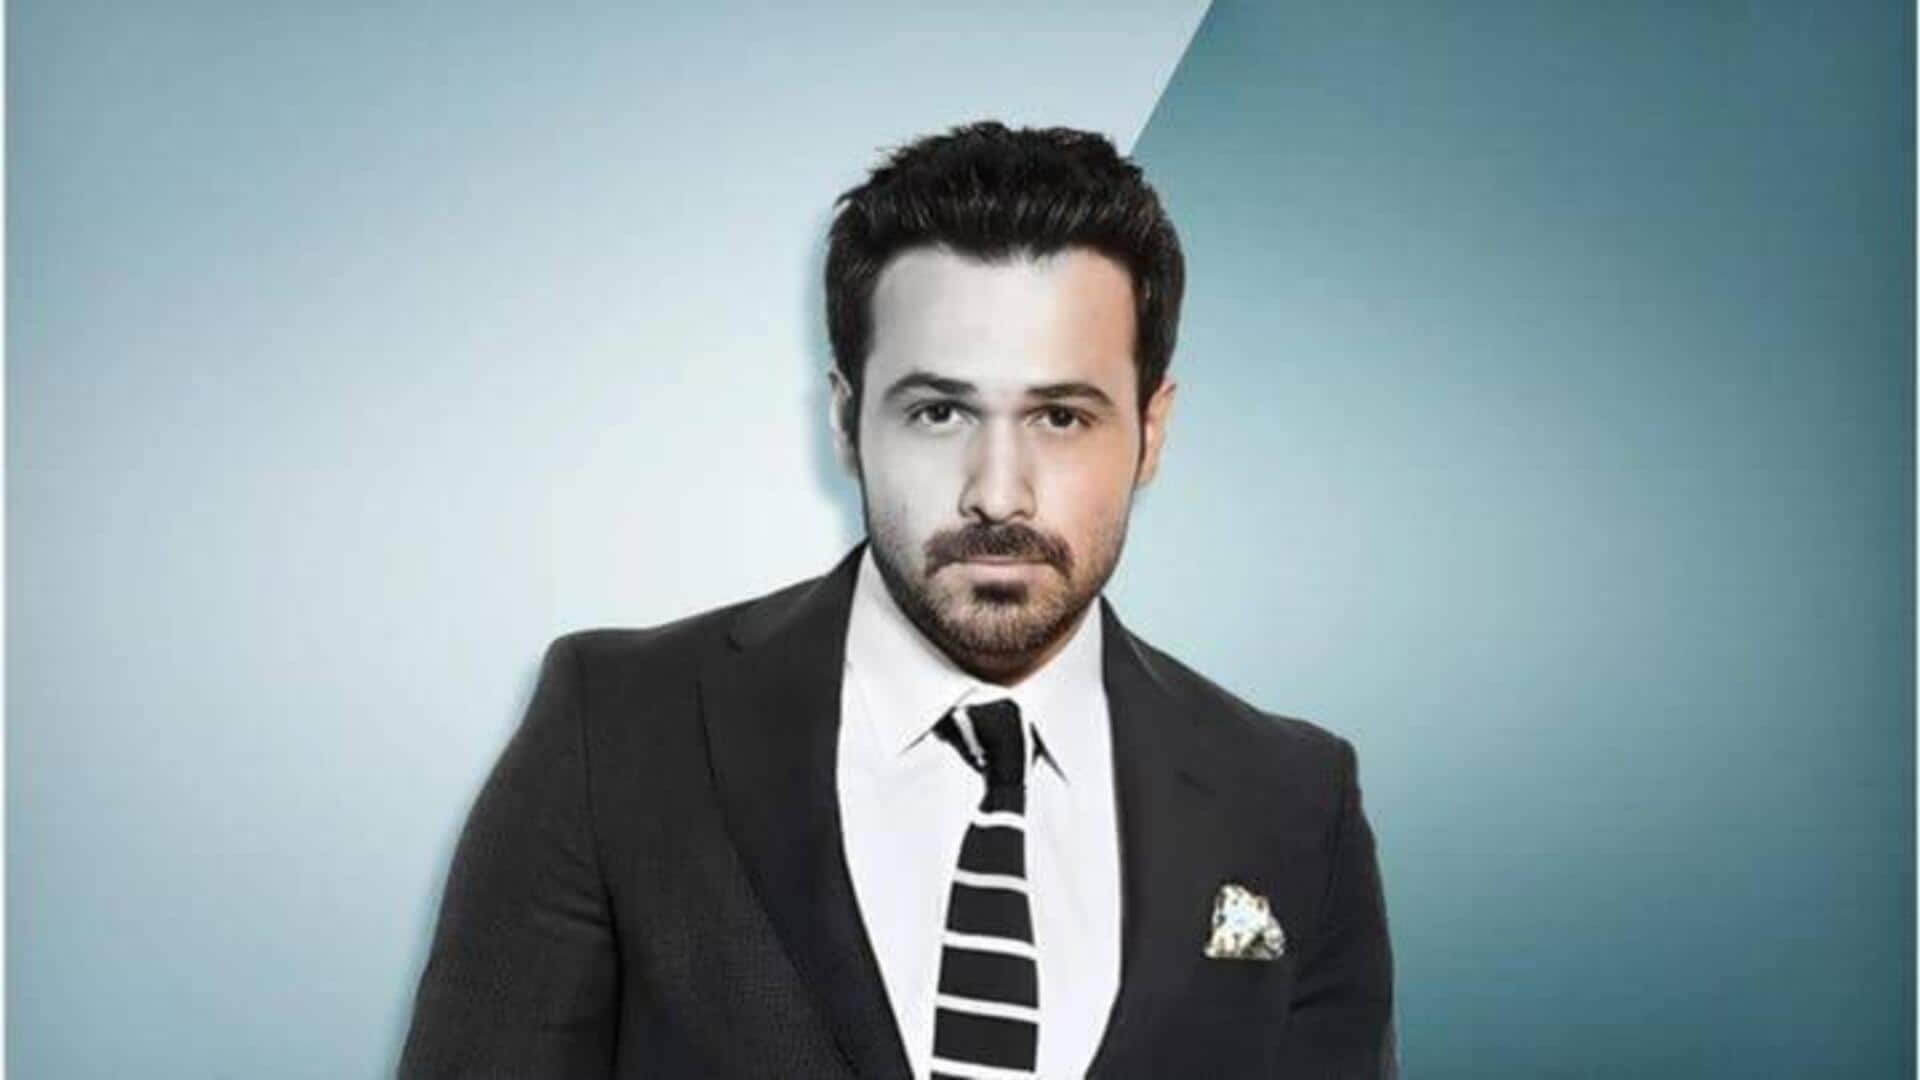 Is 'Jannat 3' a possibility? Emraan Hashmi provides cryptic answers